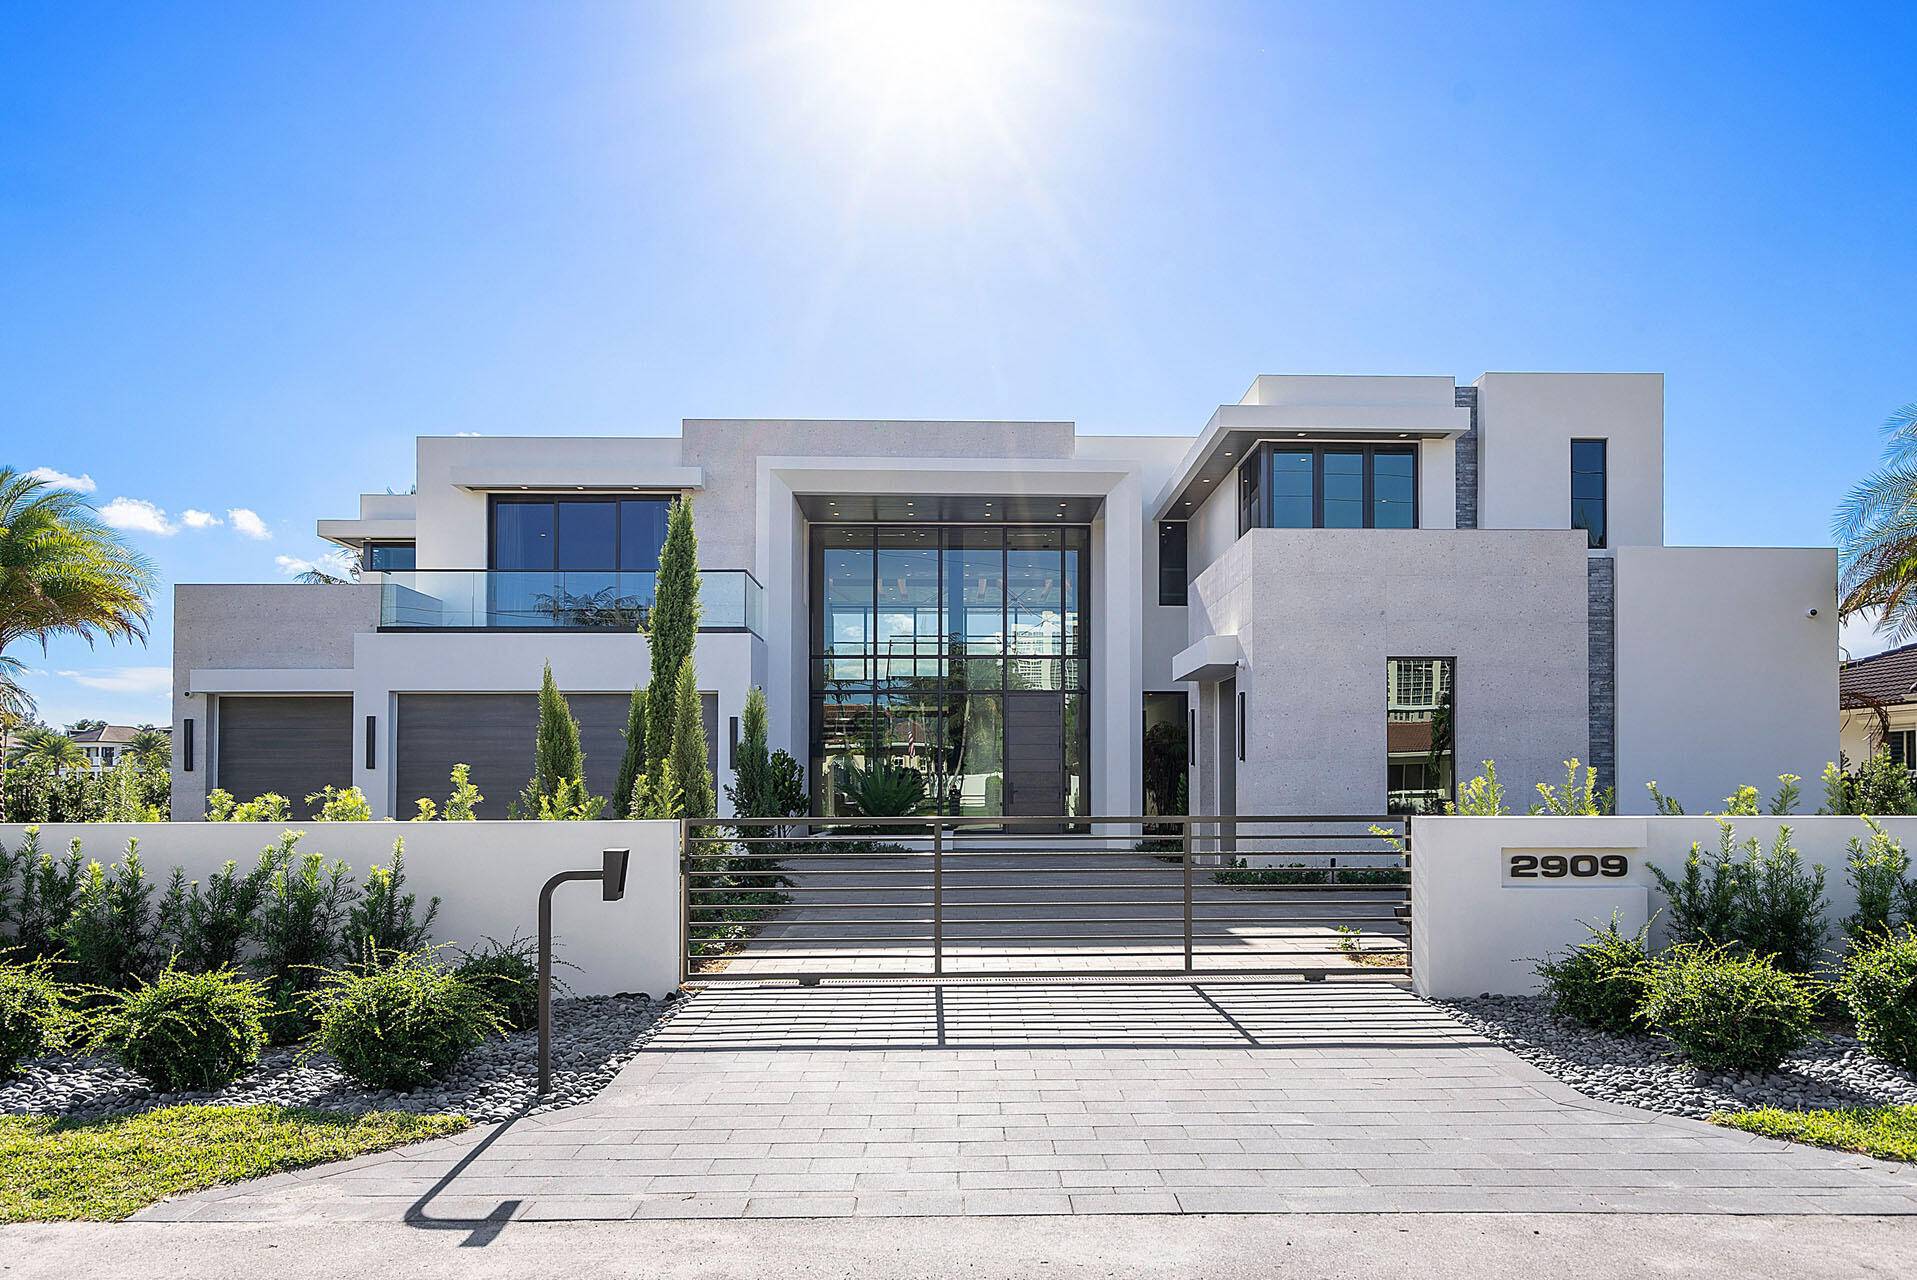 Stunning new construction by JH Norman Construction Brenner Architecture Group, located in the sought after estate section of Spanish River Road just minutes from incredible beaches.